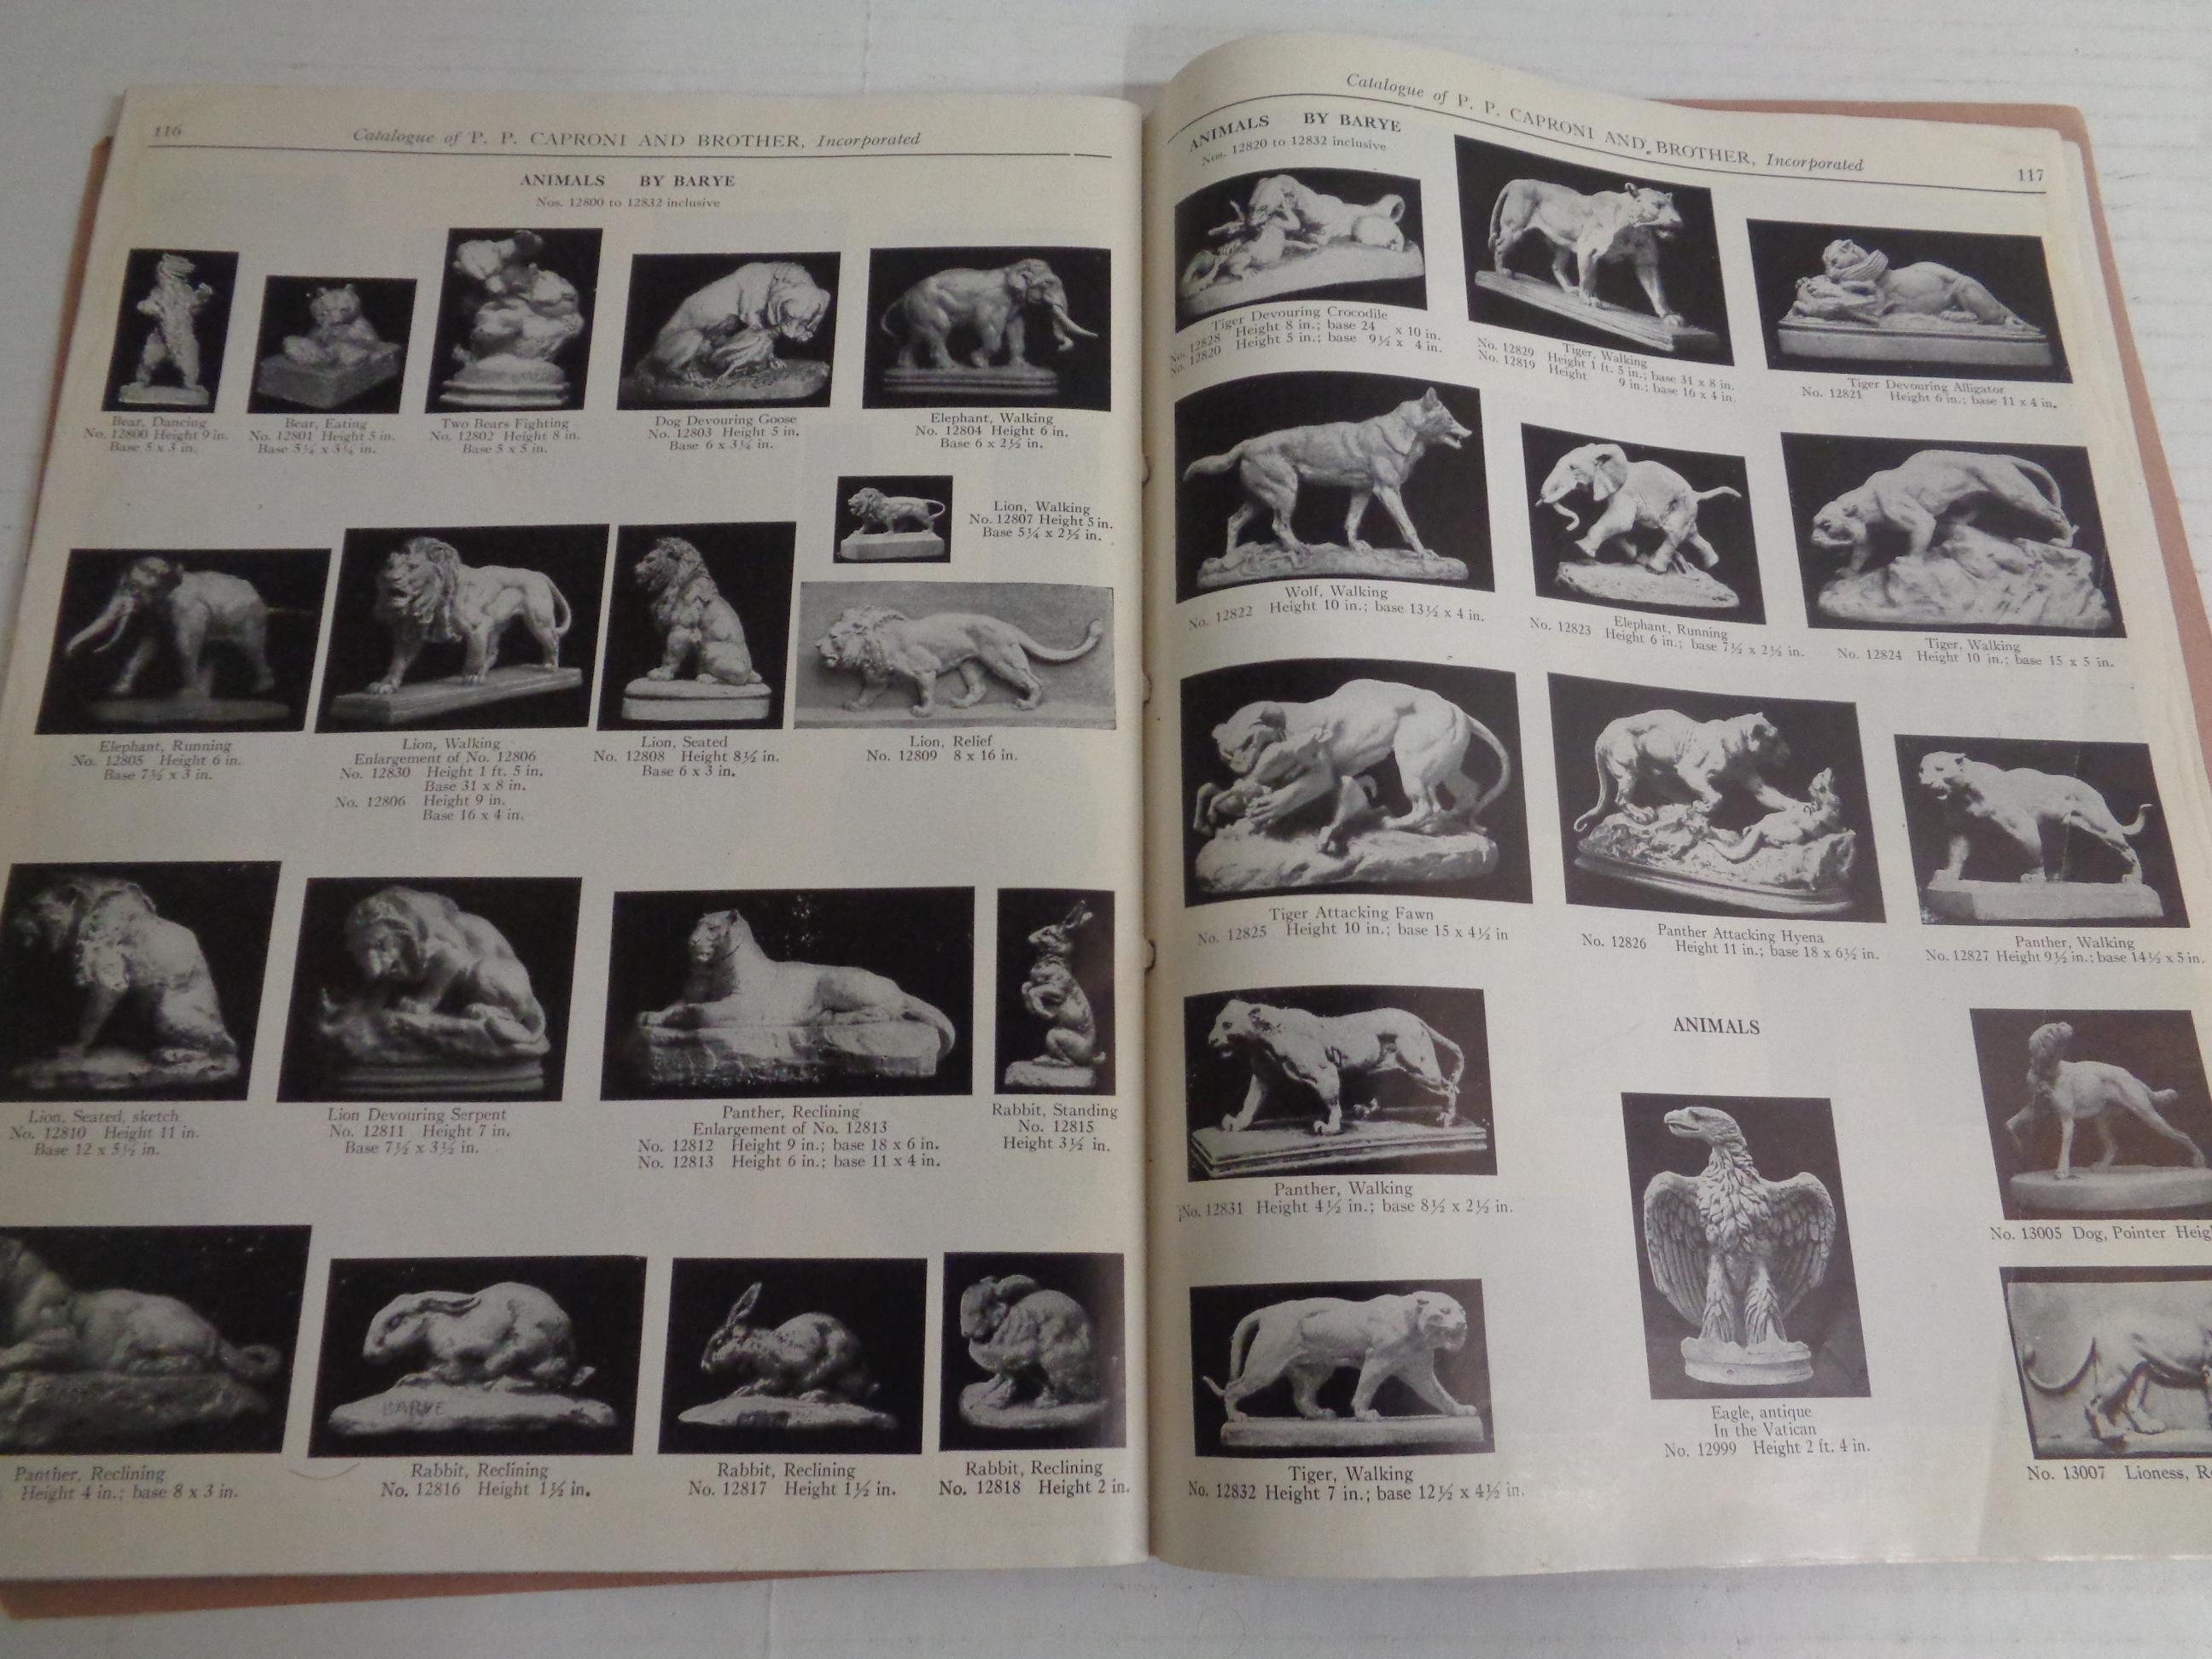 Caproni Casts: Masterpieces of Sculpture - 1932 Caproni Brothers Catalogue  For Sale 5